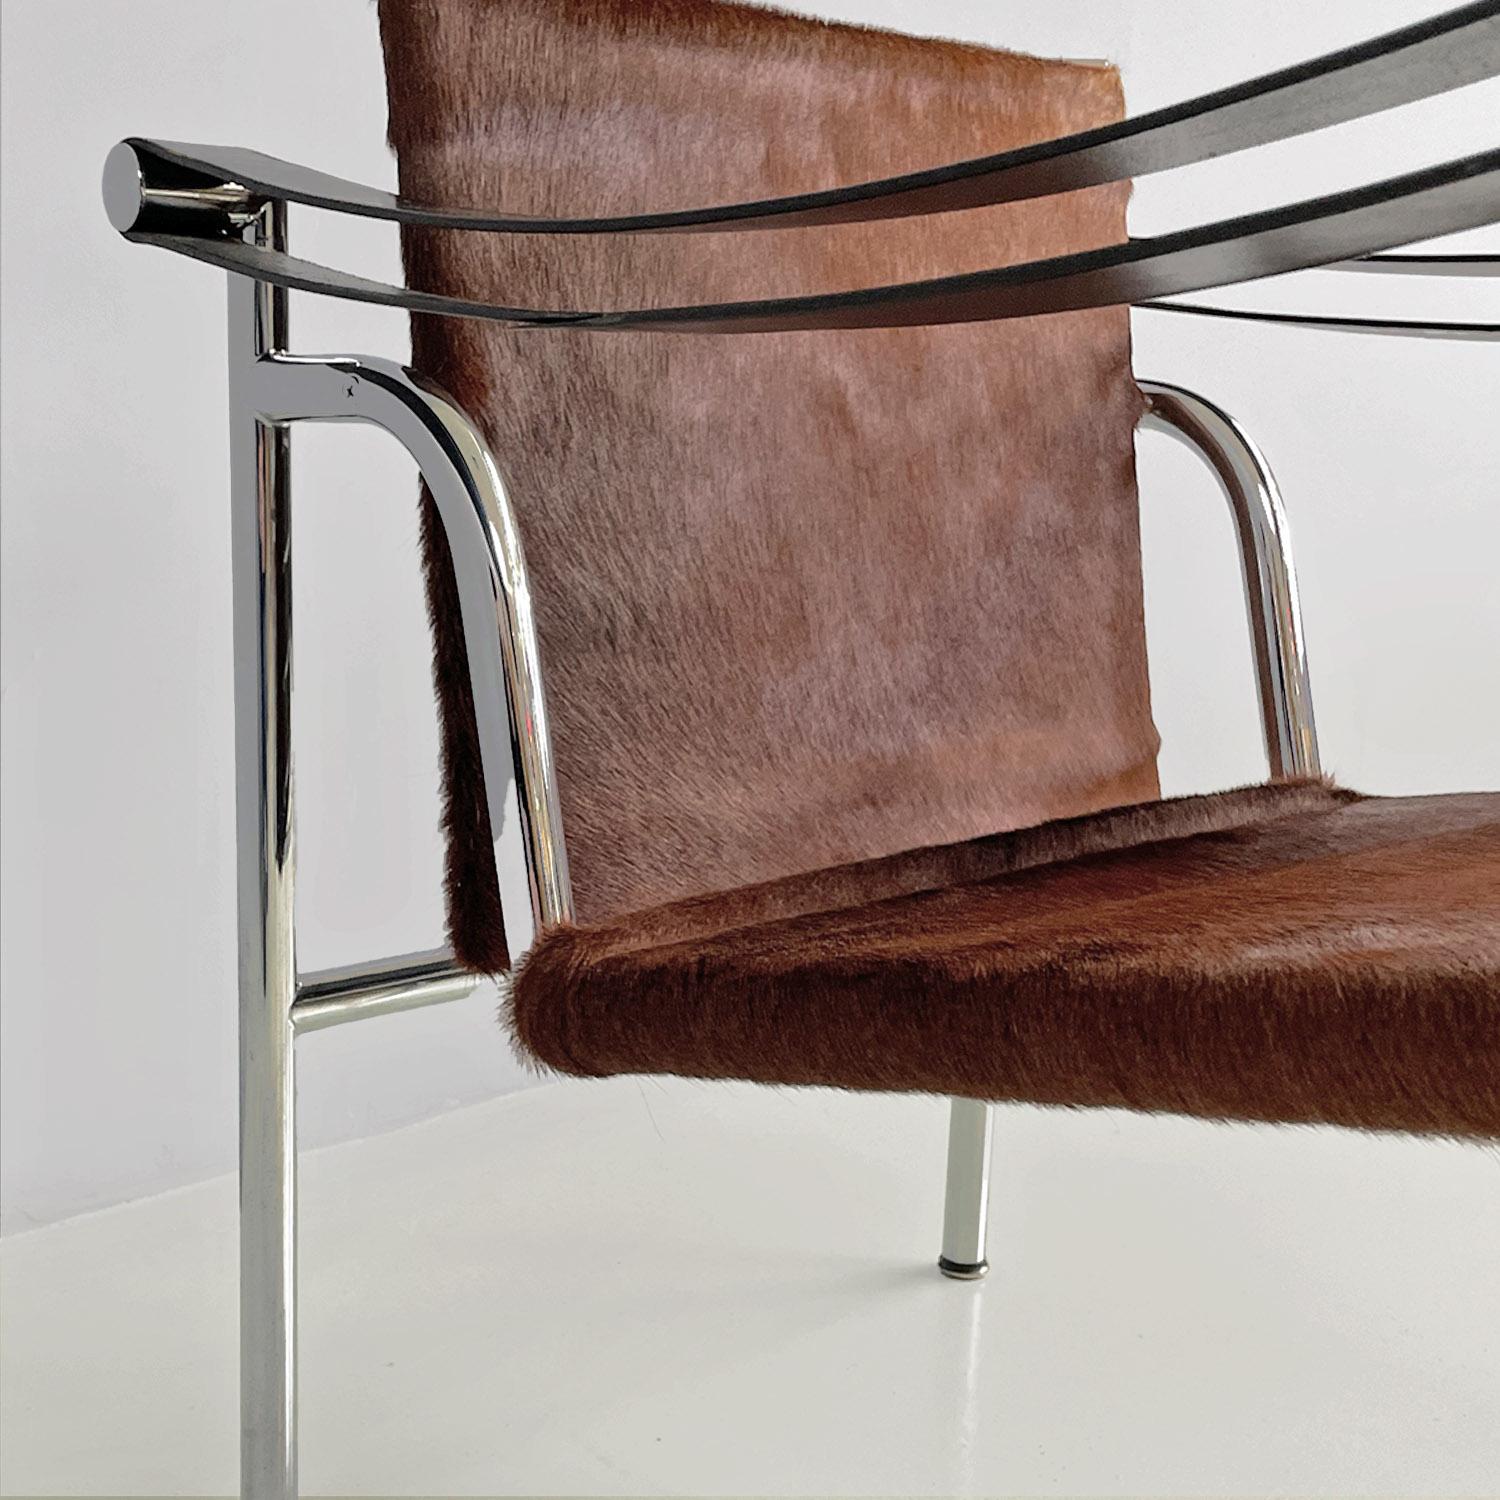 Italian modern LC1 armchair, Le Corbusier, Jeanneret and Perriand, Cassina 1960s For Sale 12